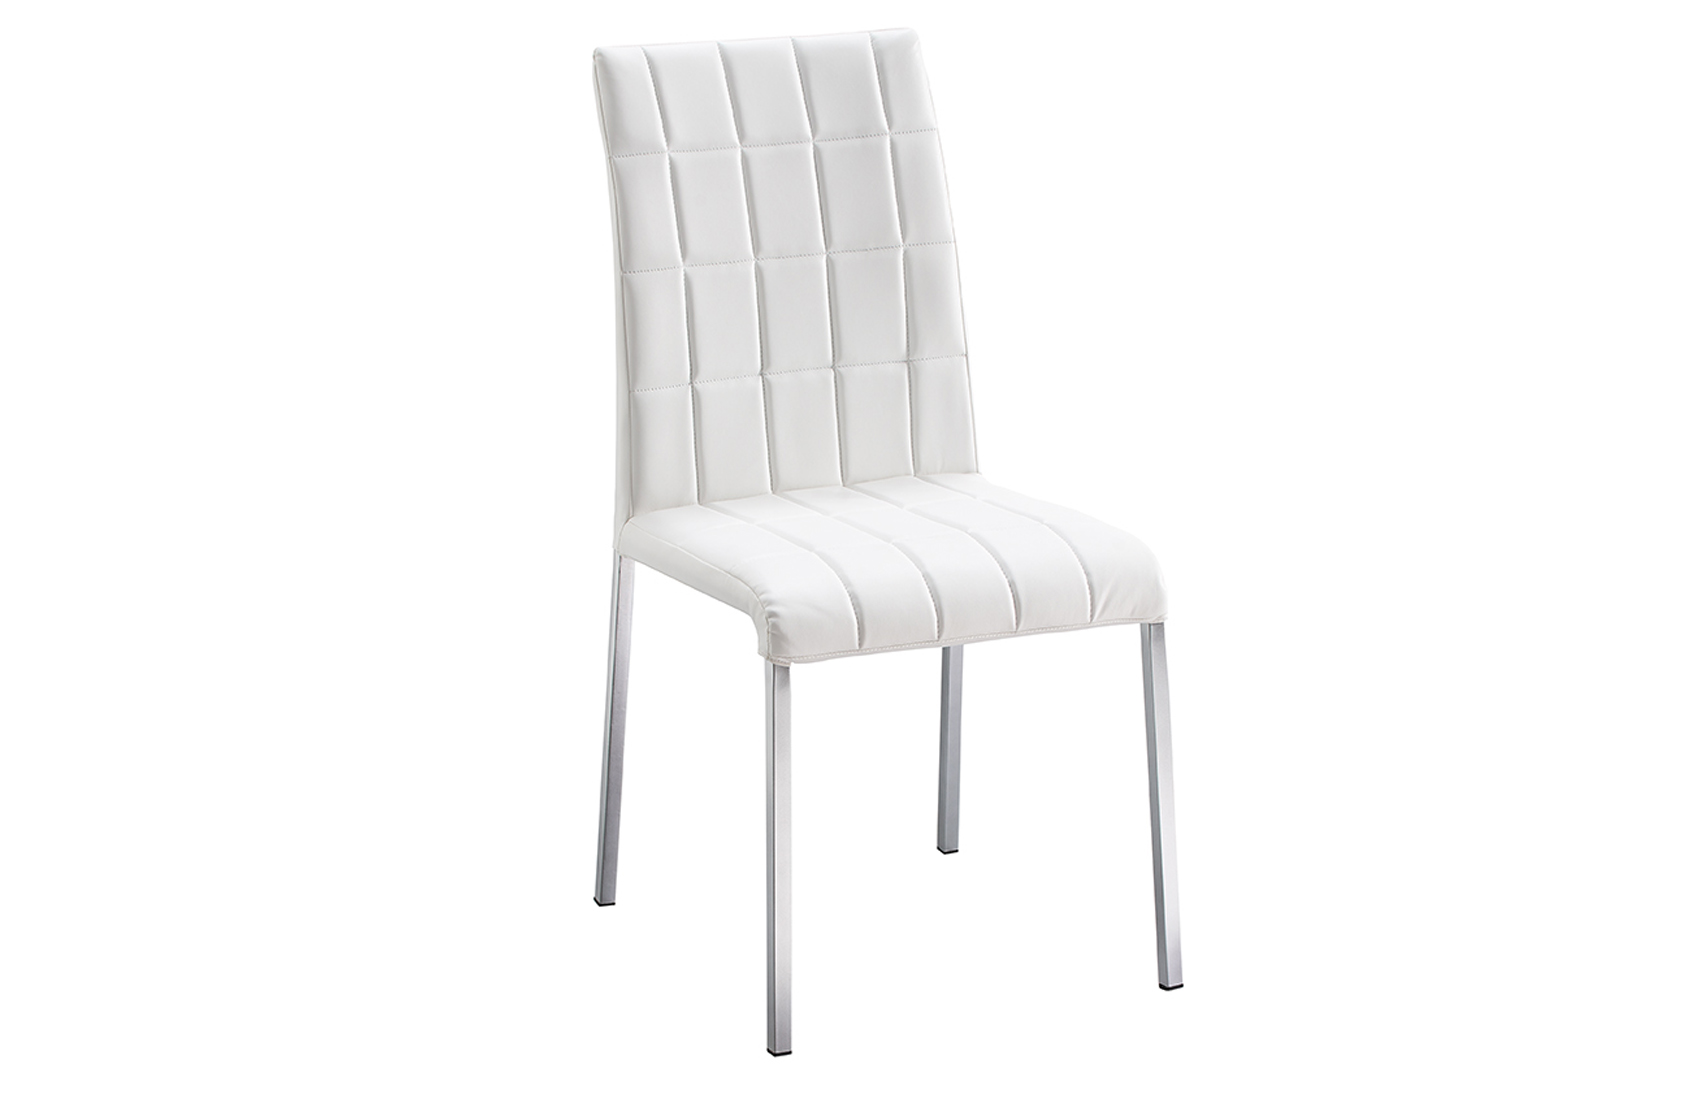 Dining Room Furniture Swivel Chairs 3450 Chair White